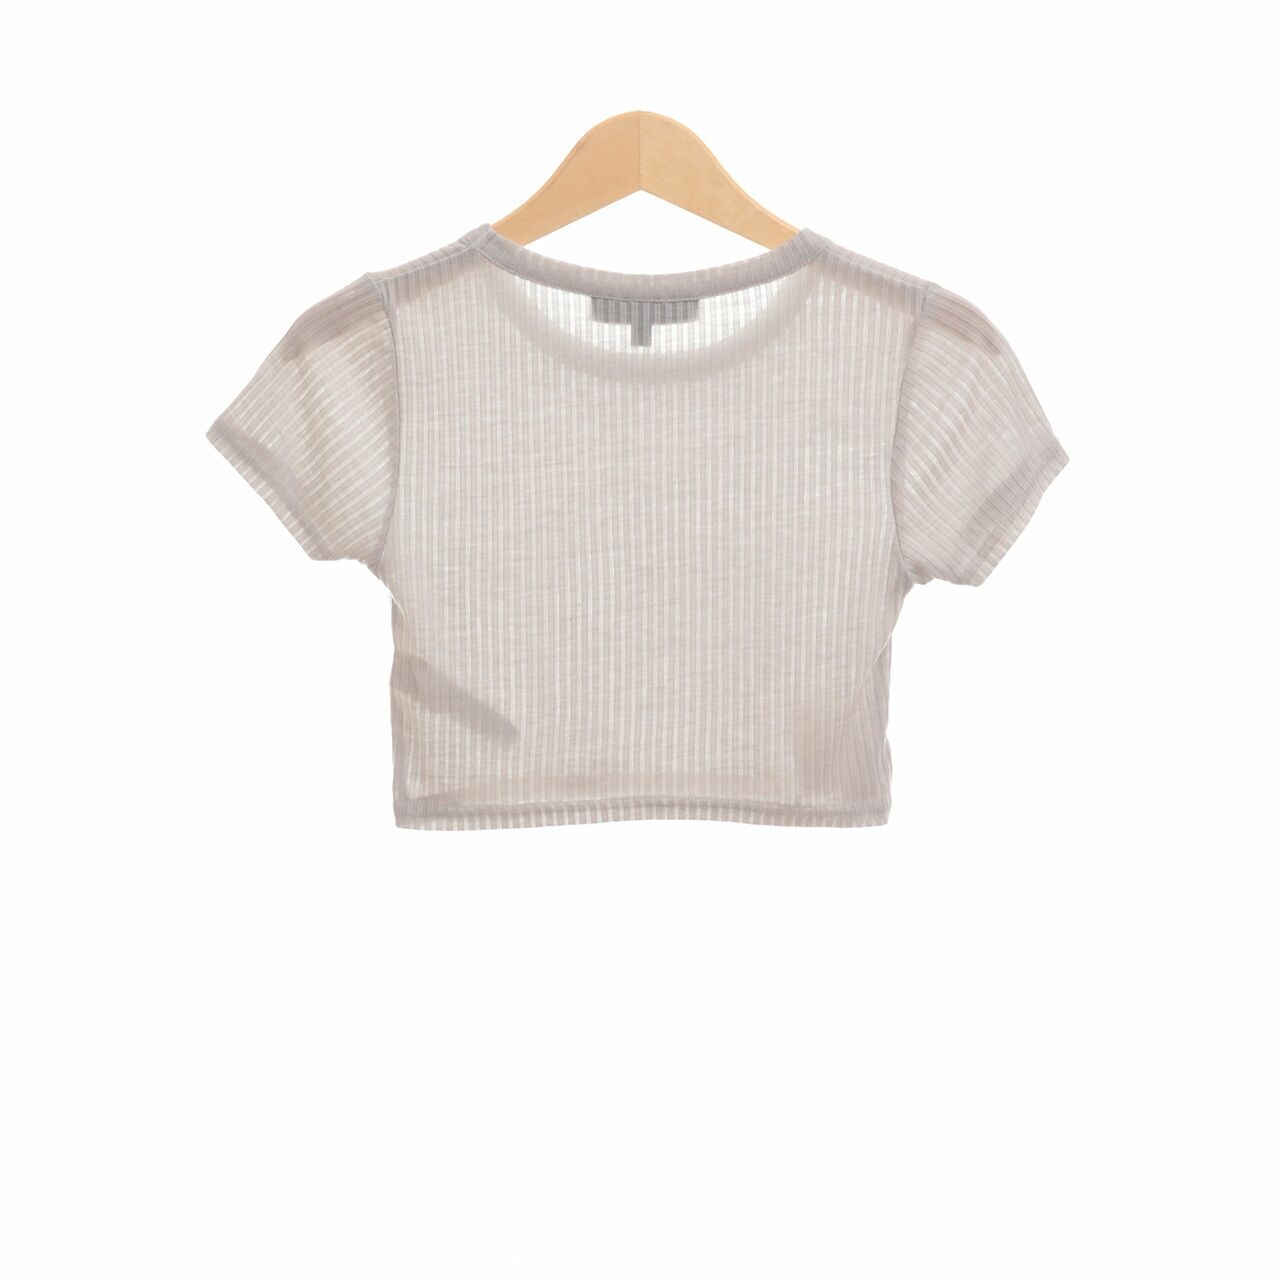 Topshop Grey Cropped Blouse